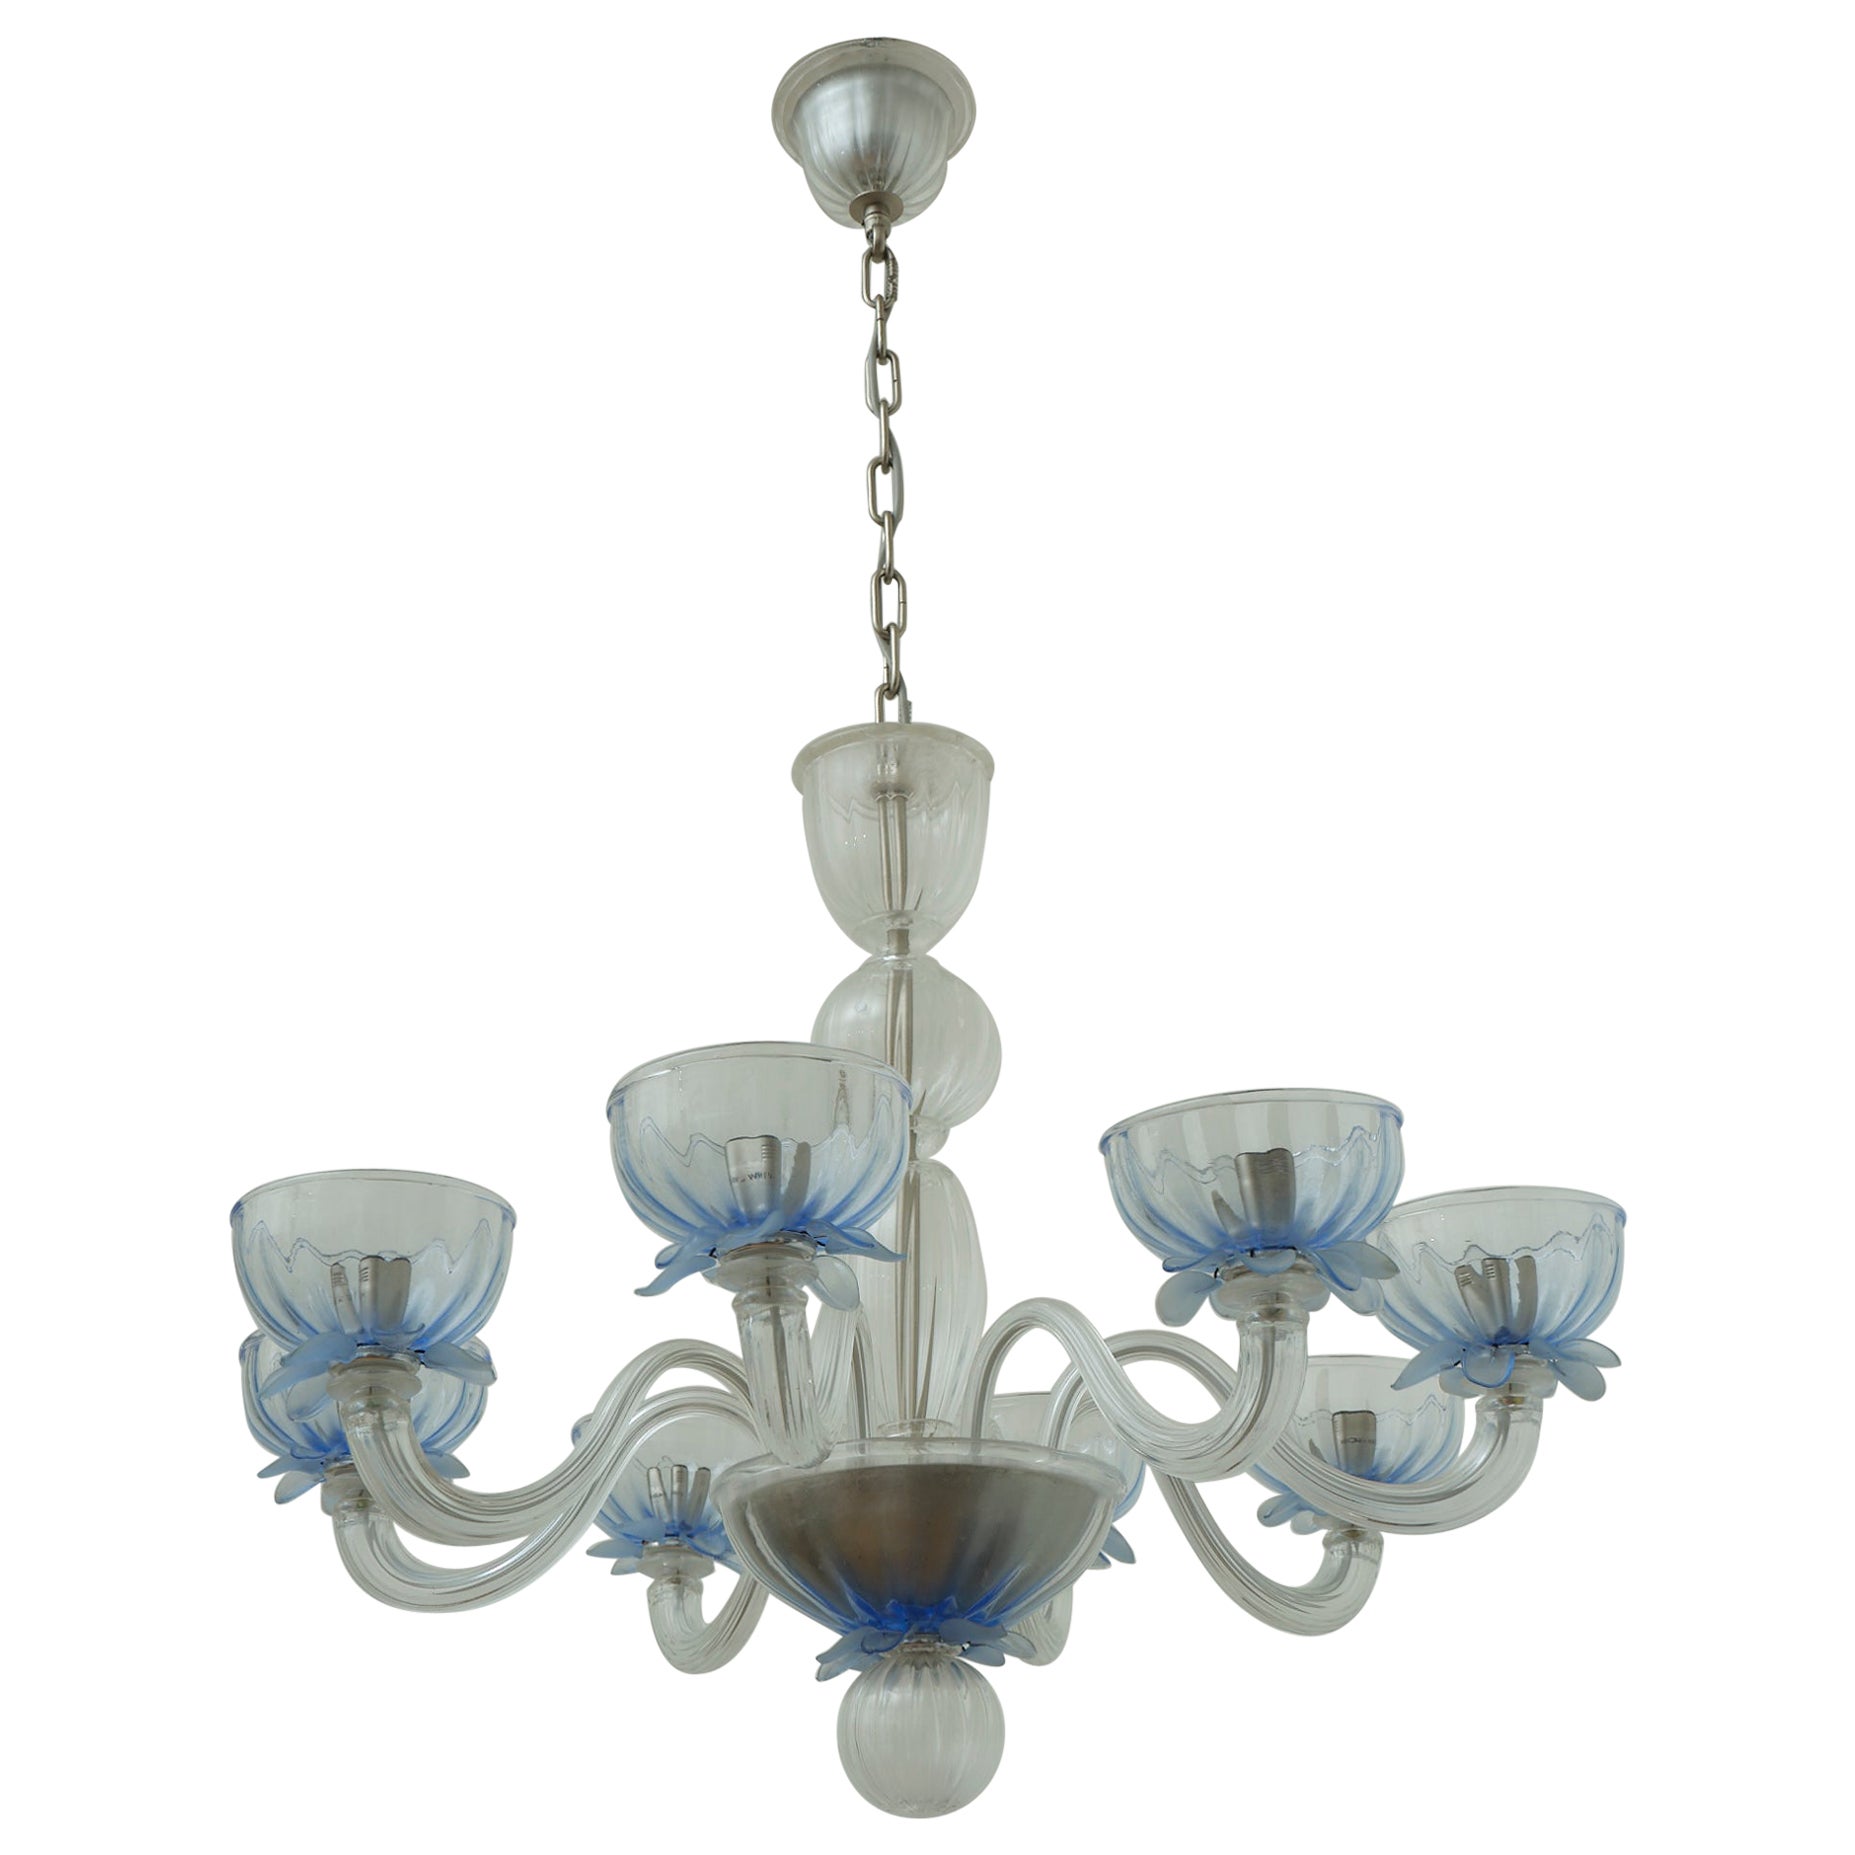 Giant European glass chandelier 8 arms blue details in the style of Murano For Sale